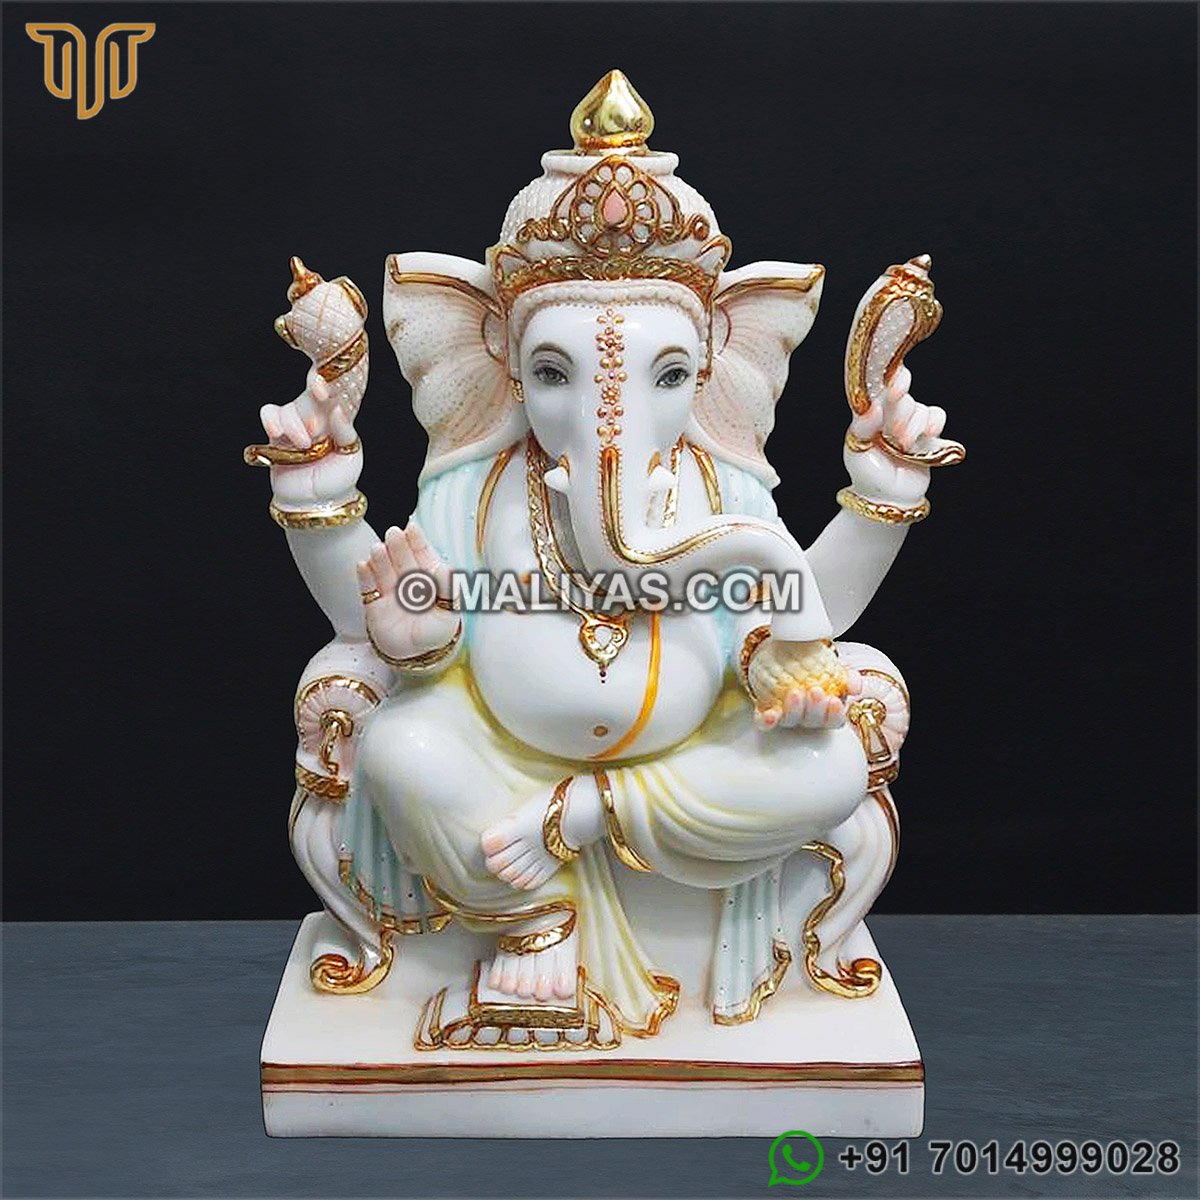 Cultured Marble Dust Lord Ganesha Statue